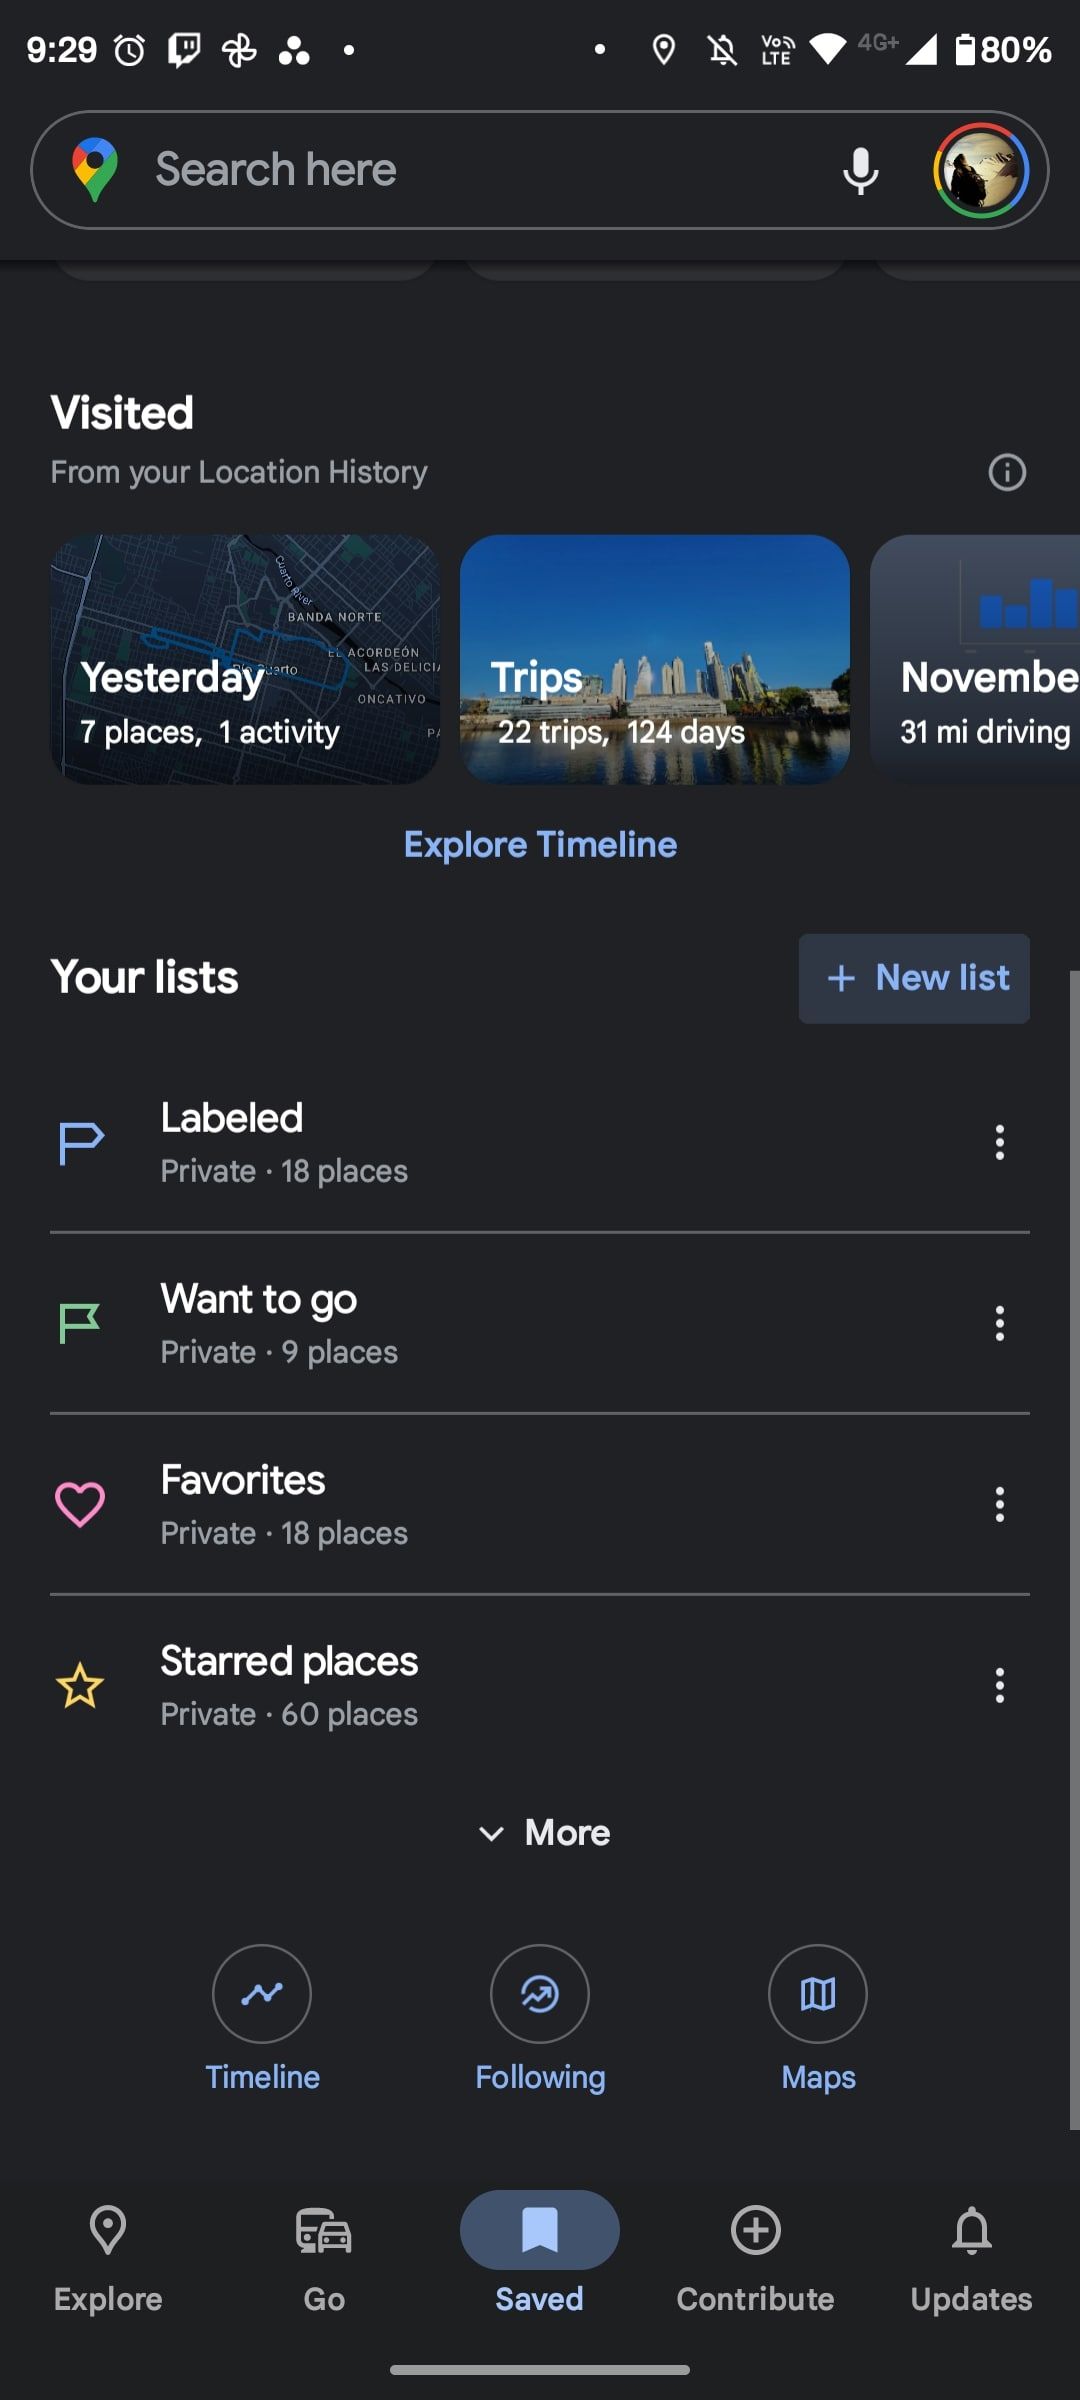 Saved tab in Google Maps showing Your lists